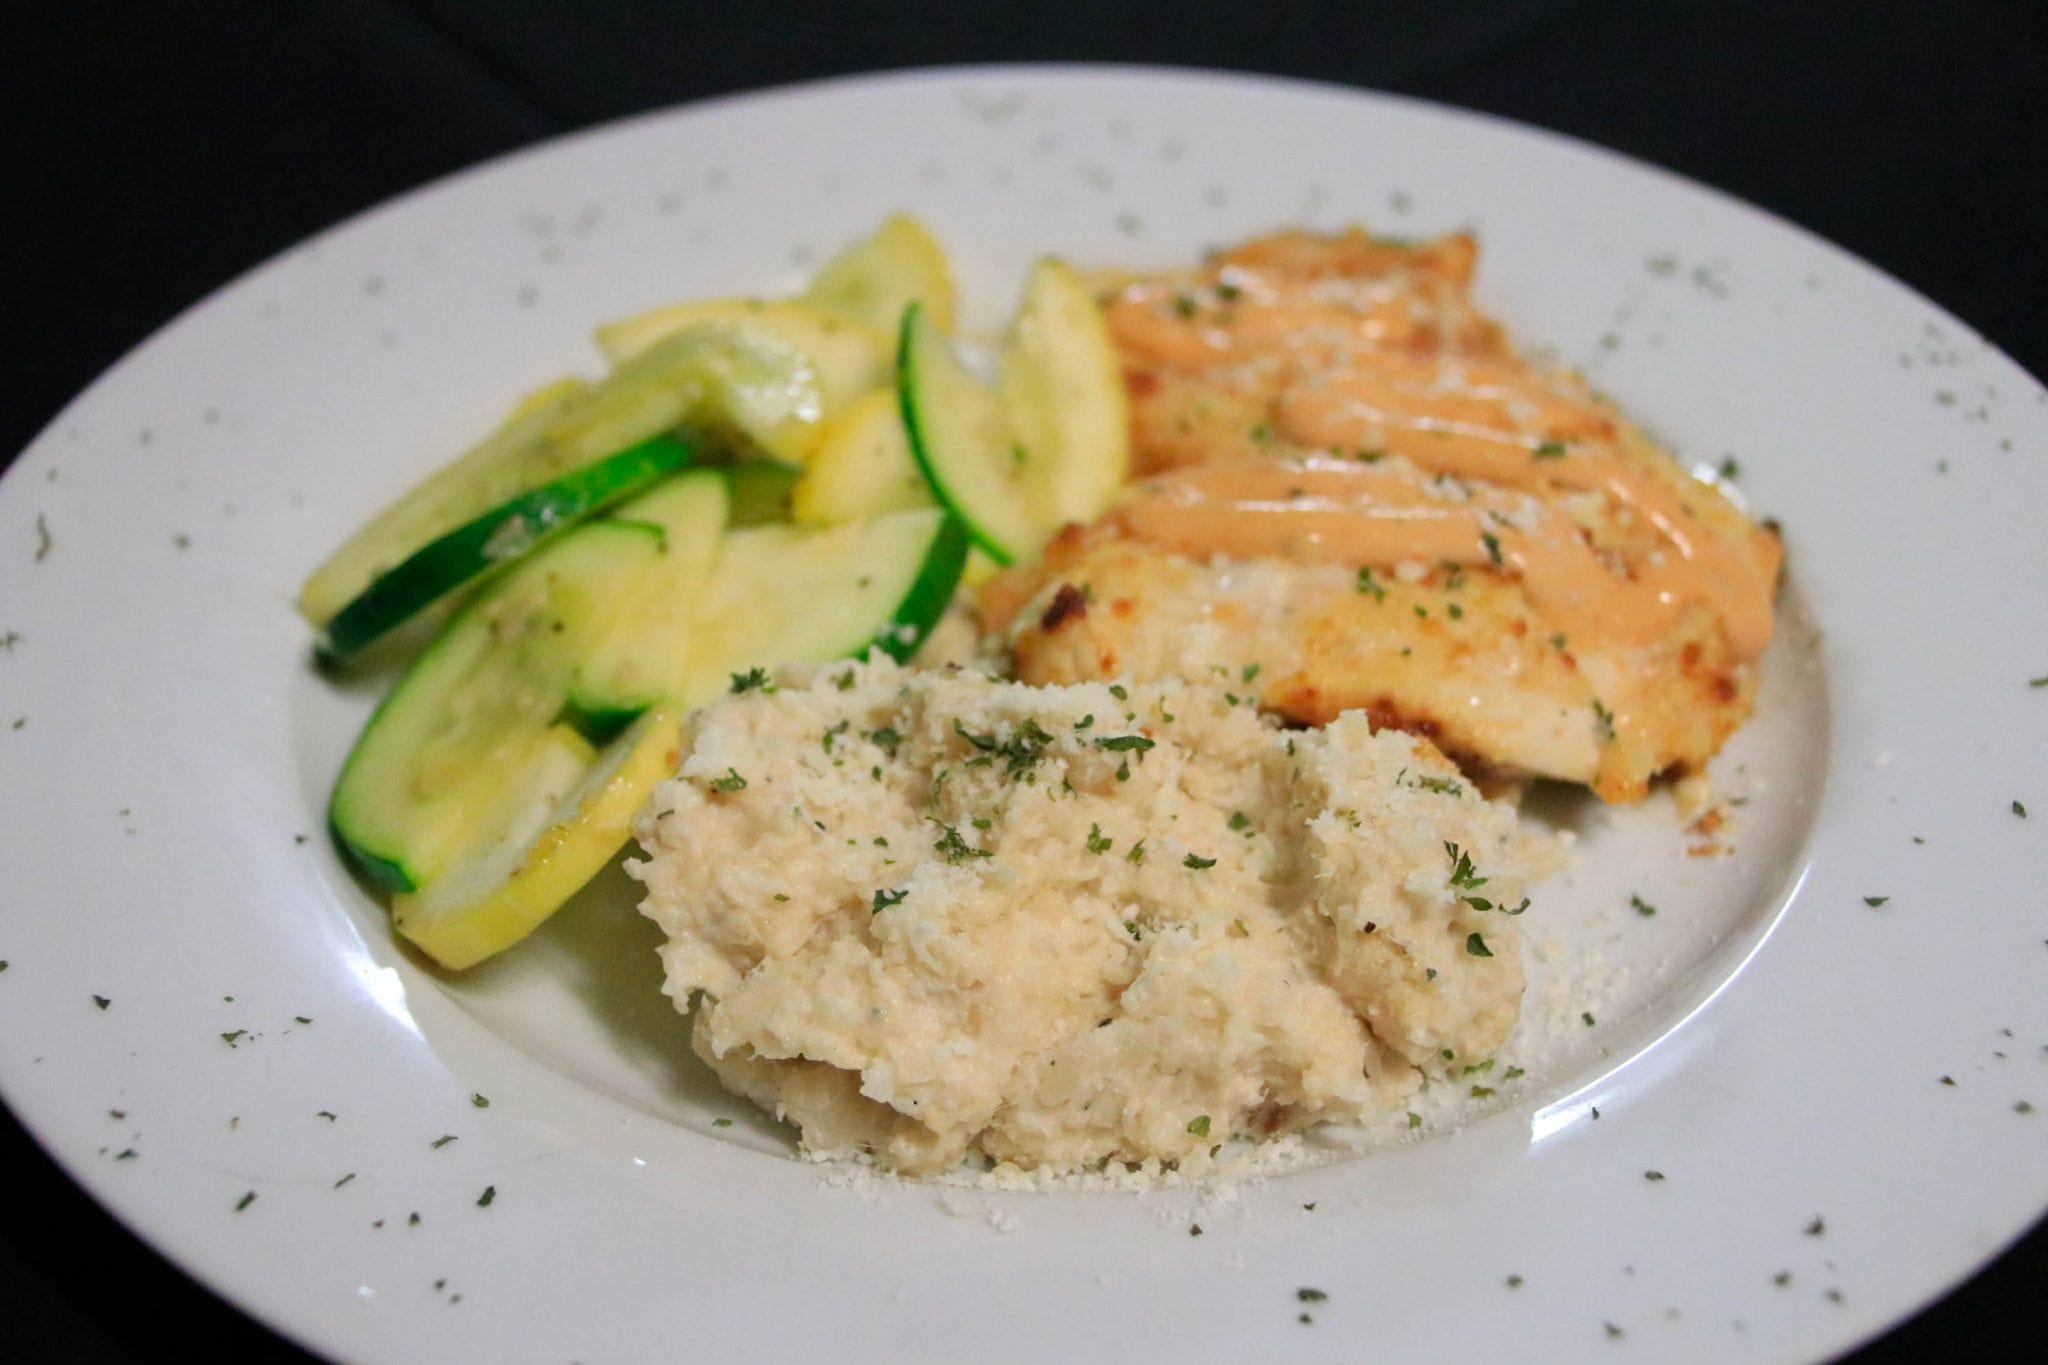 The Cauliflower Crusted Salmon is one of the many dishes included on Dolce Vita's keto menu.